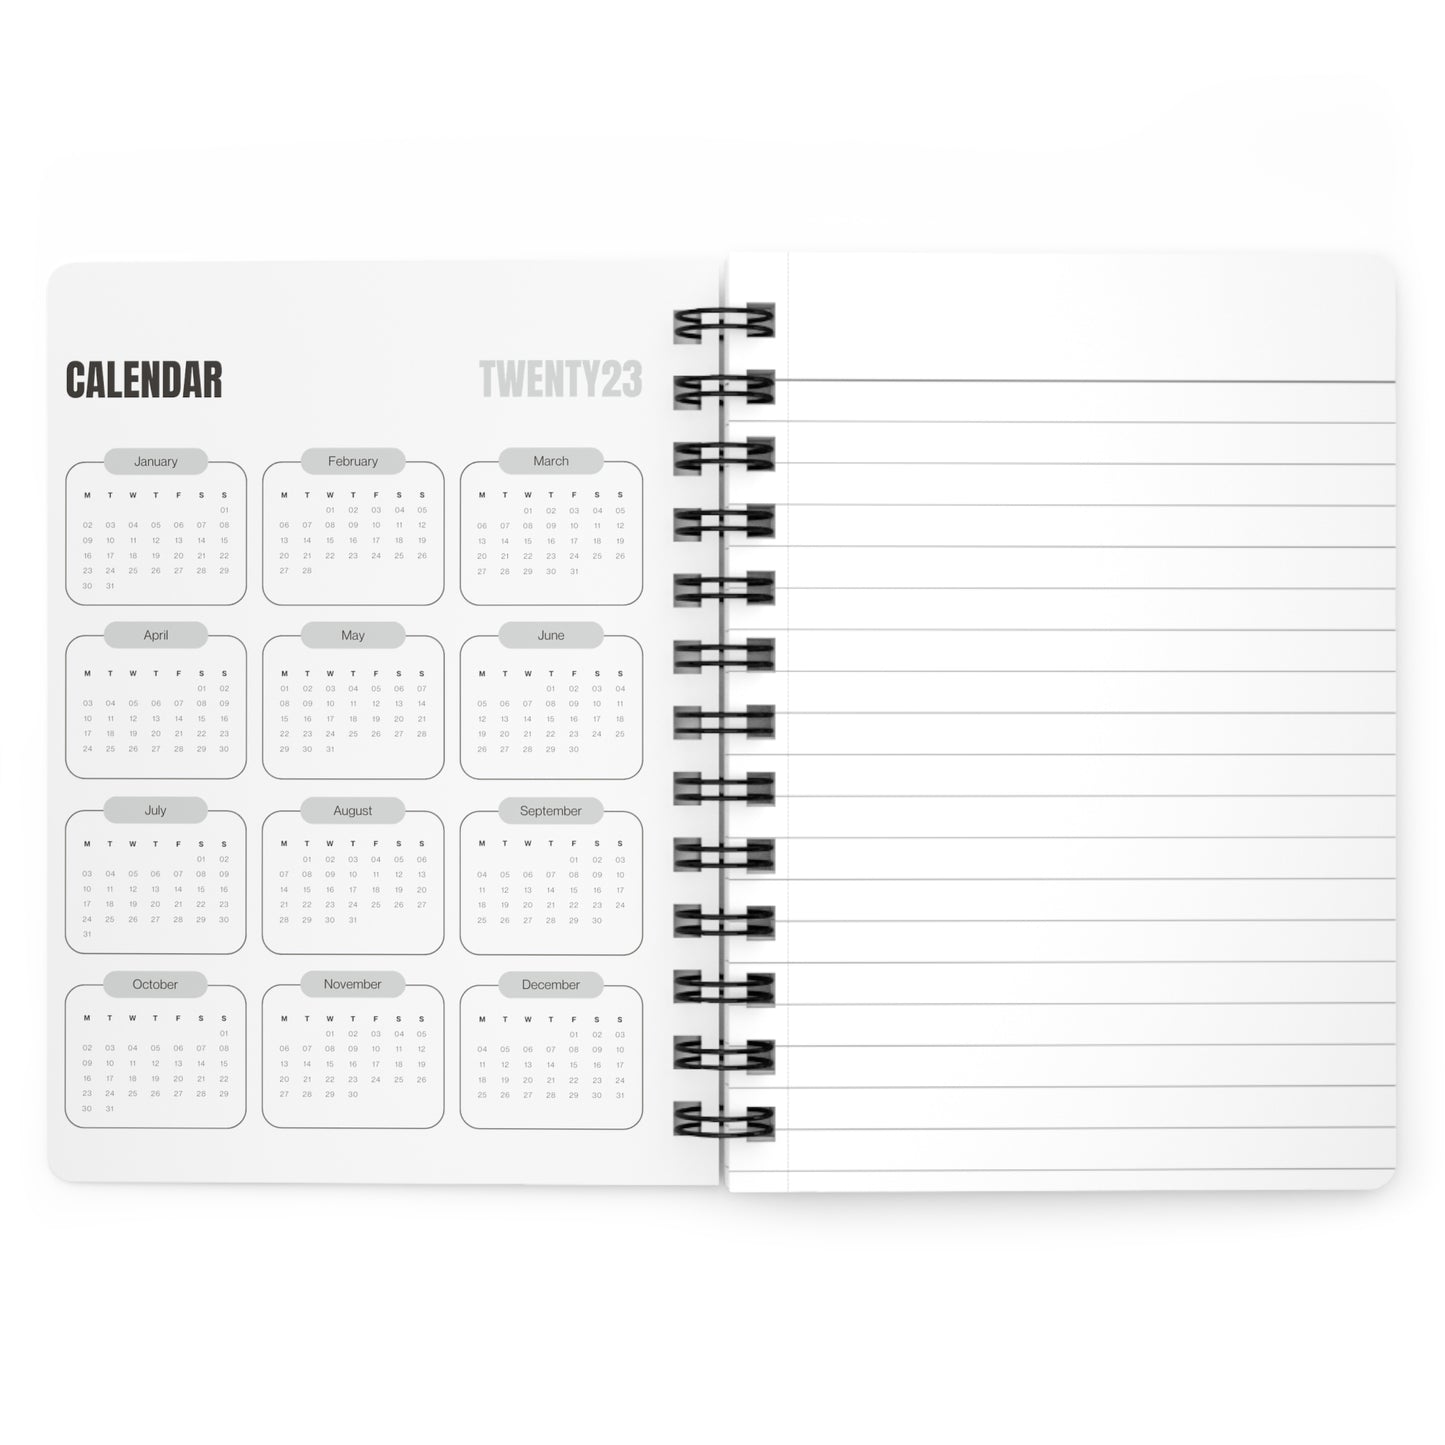 ViolaSpiral Bound Notebooks and Journals with 2023-2024 Year-at-a-Glance Calendar